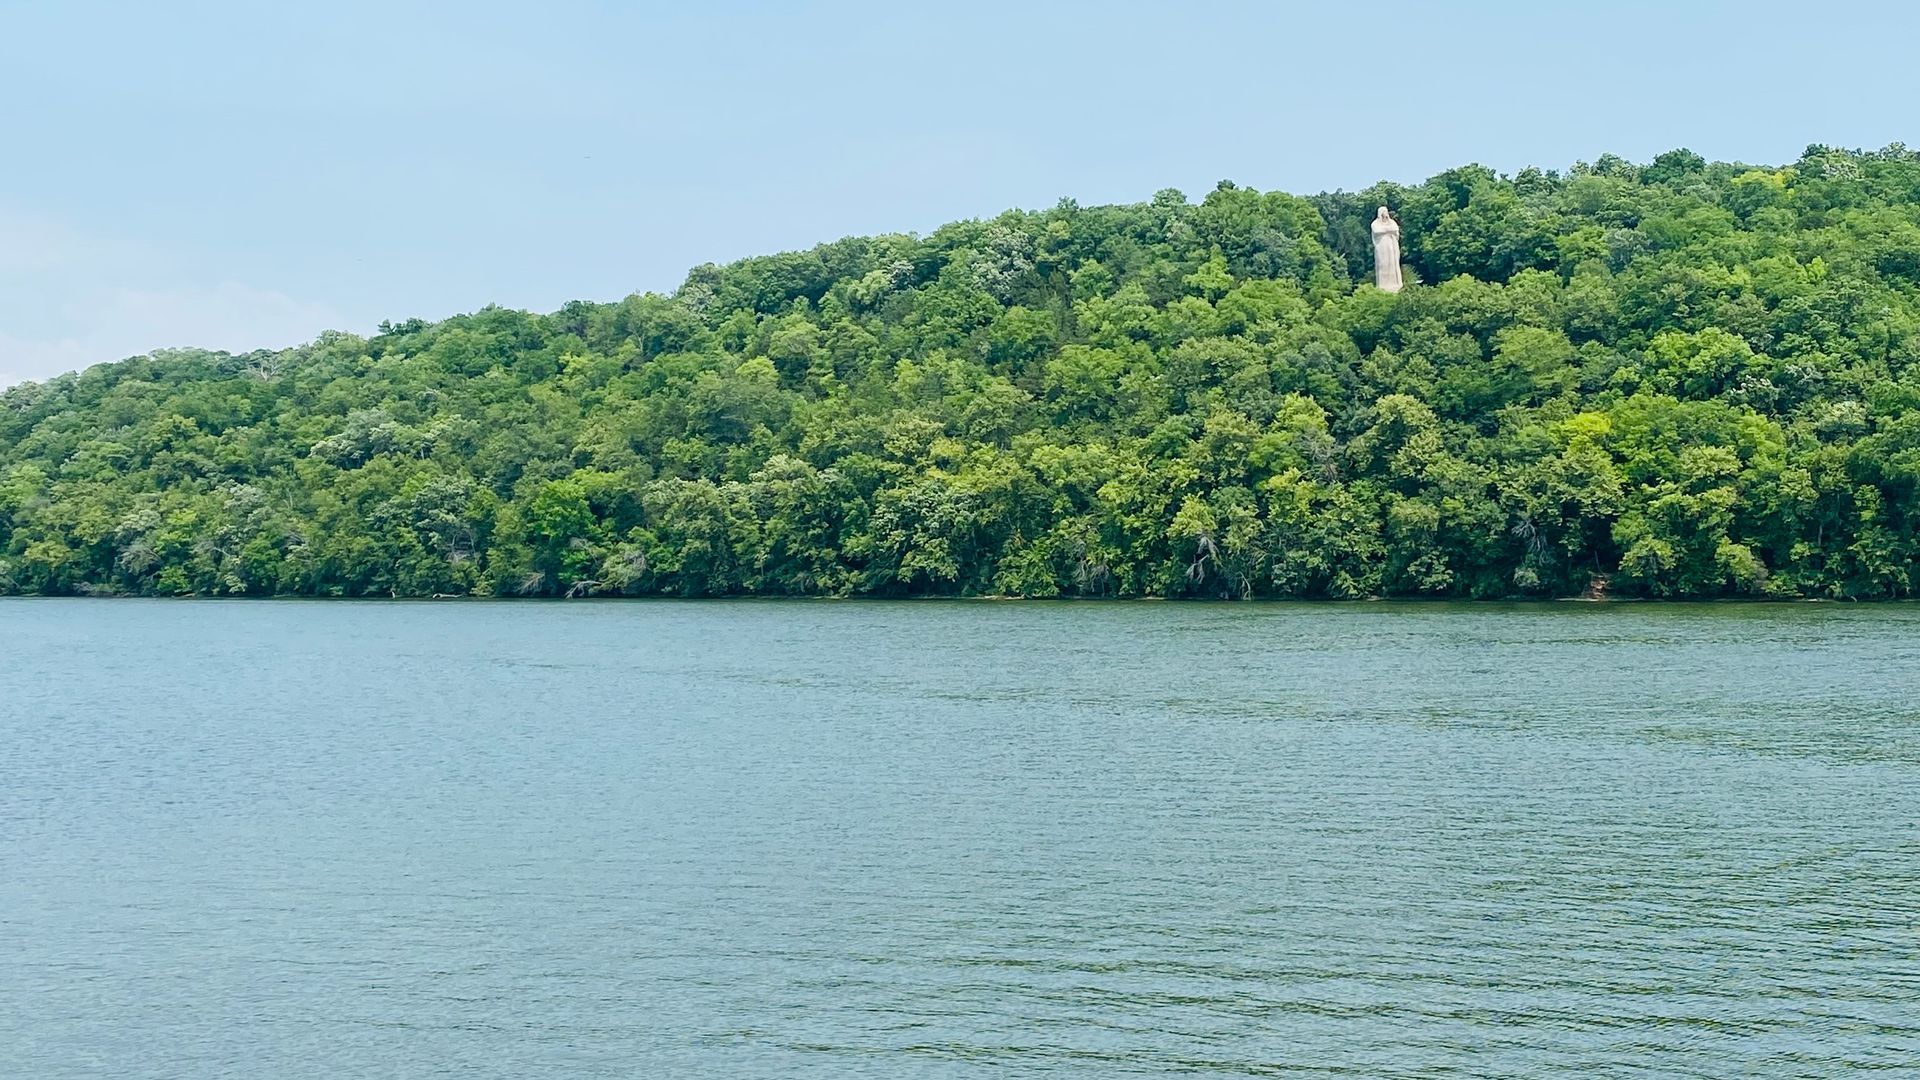 A large body of water surrounded by trees on a hillside